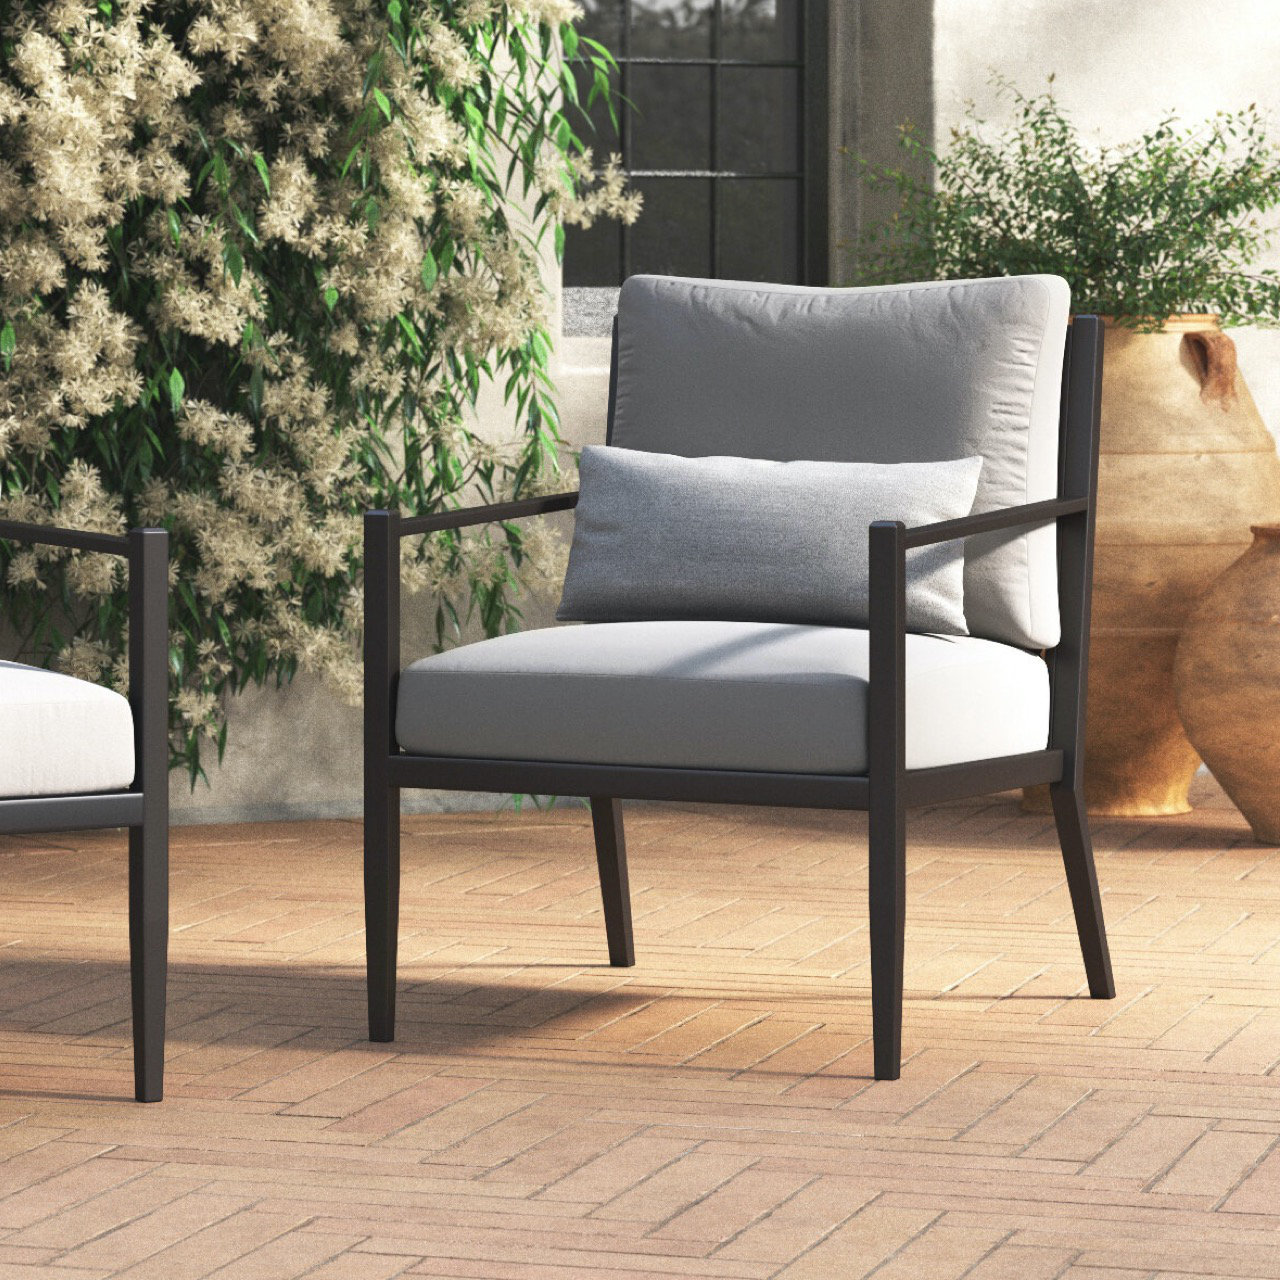 Top Picks: Outdoor Chairs